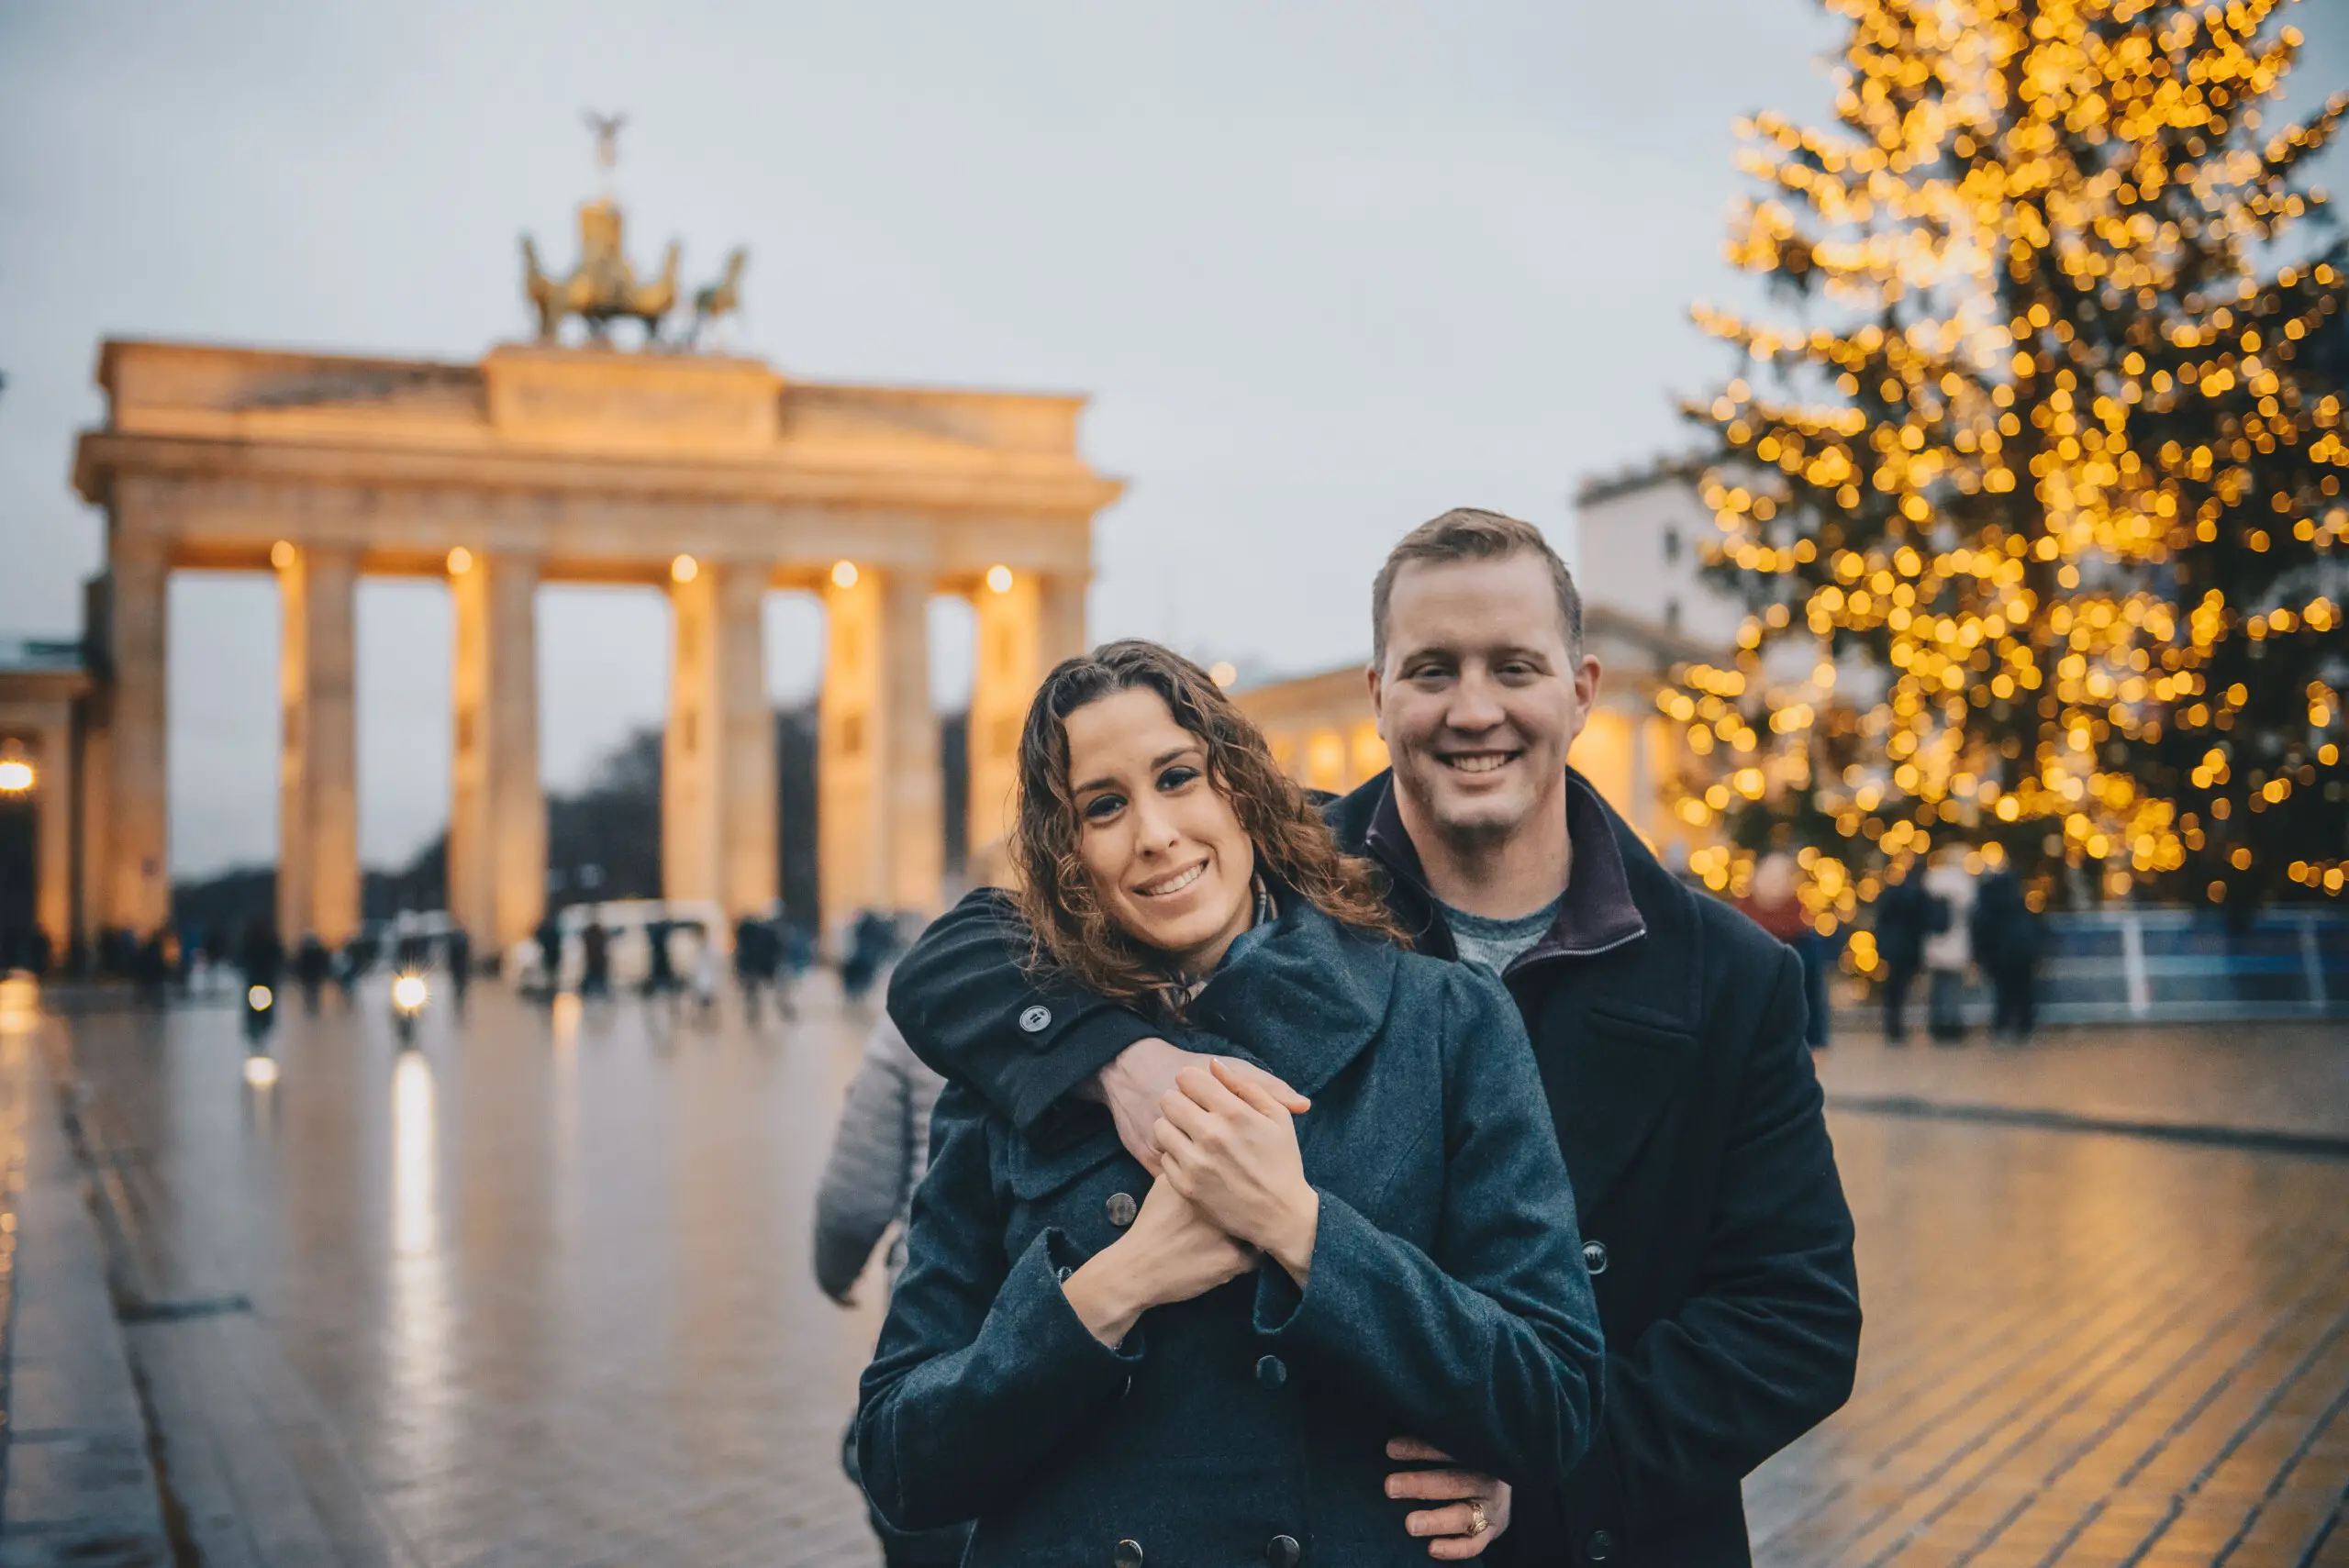 Proposal photoshoot by Cristina, Localgrapher in Berlin